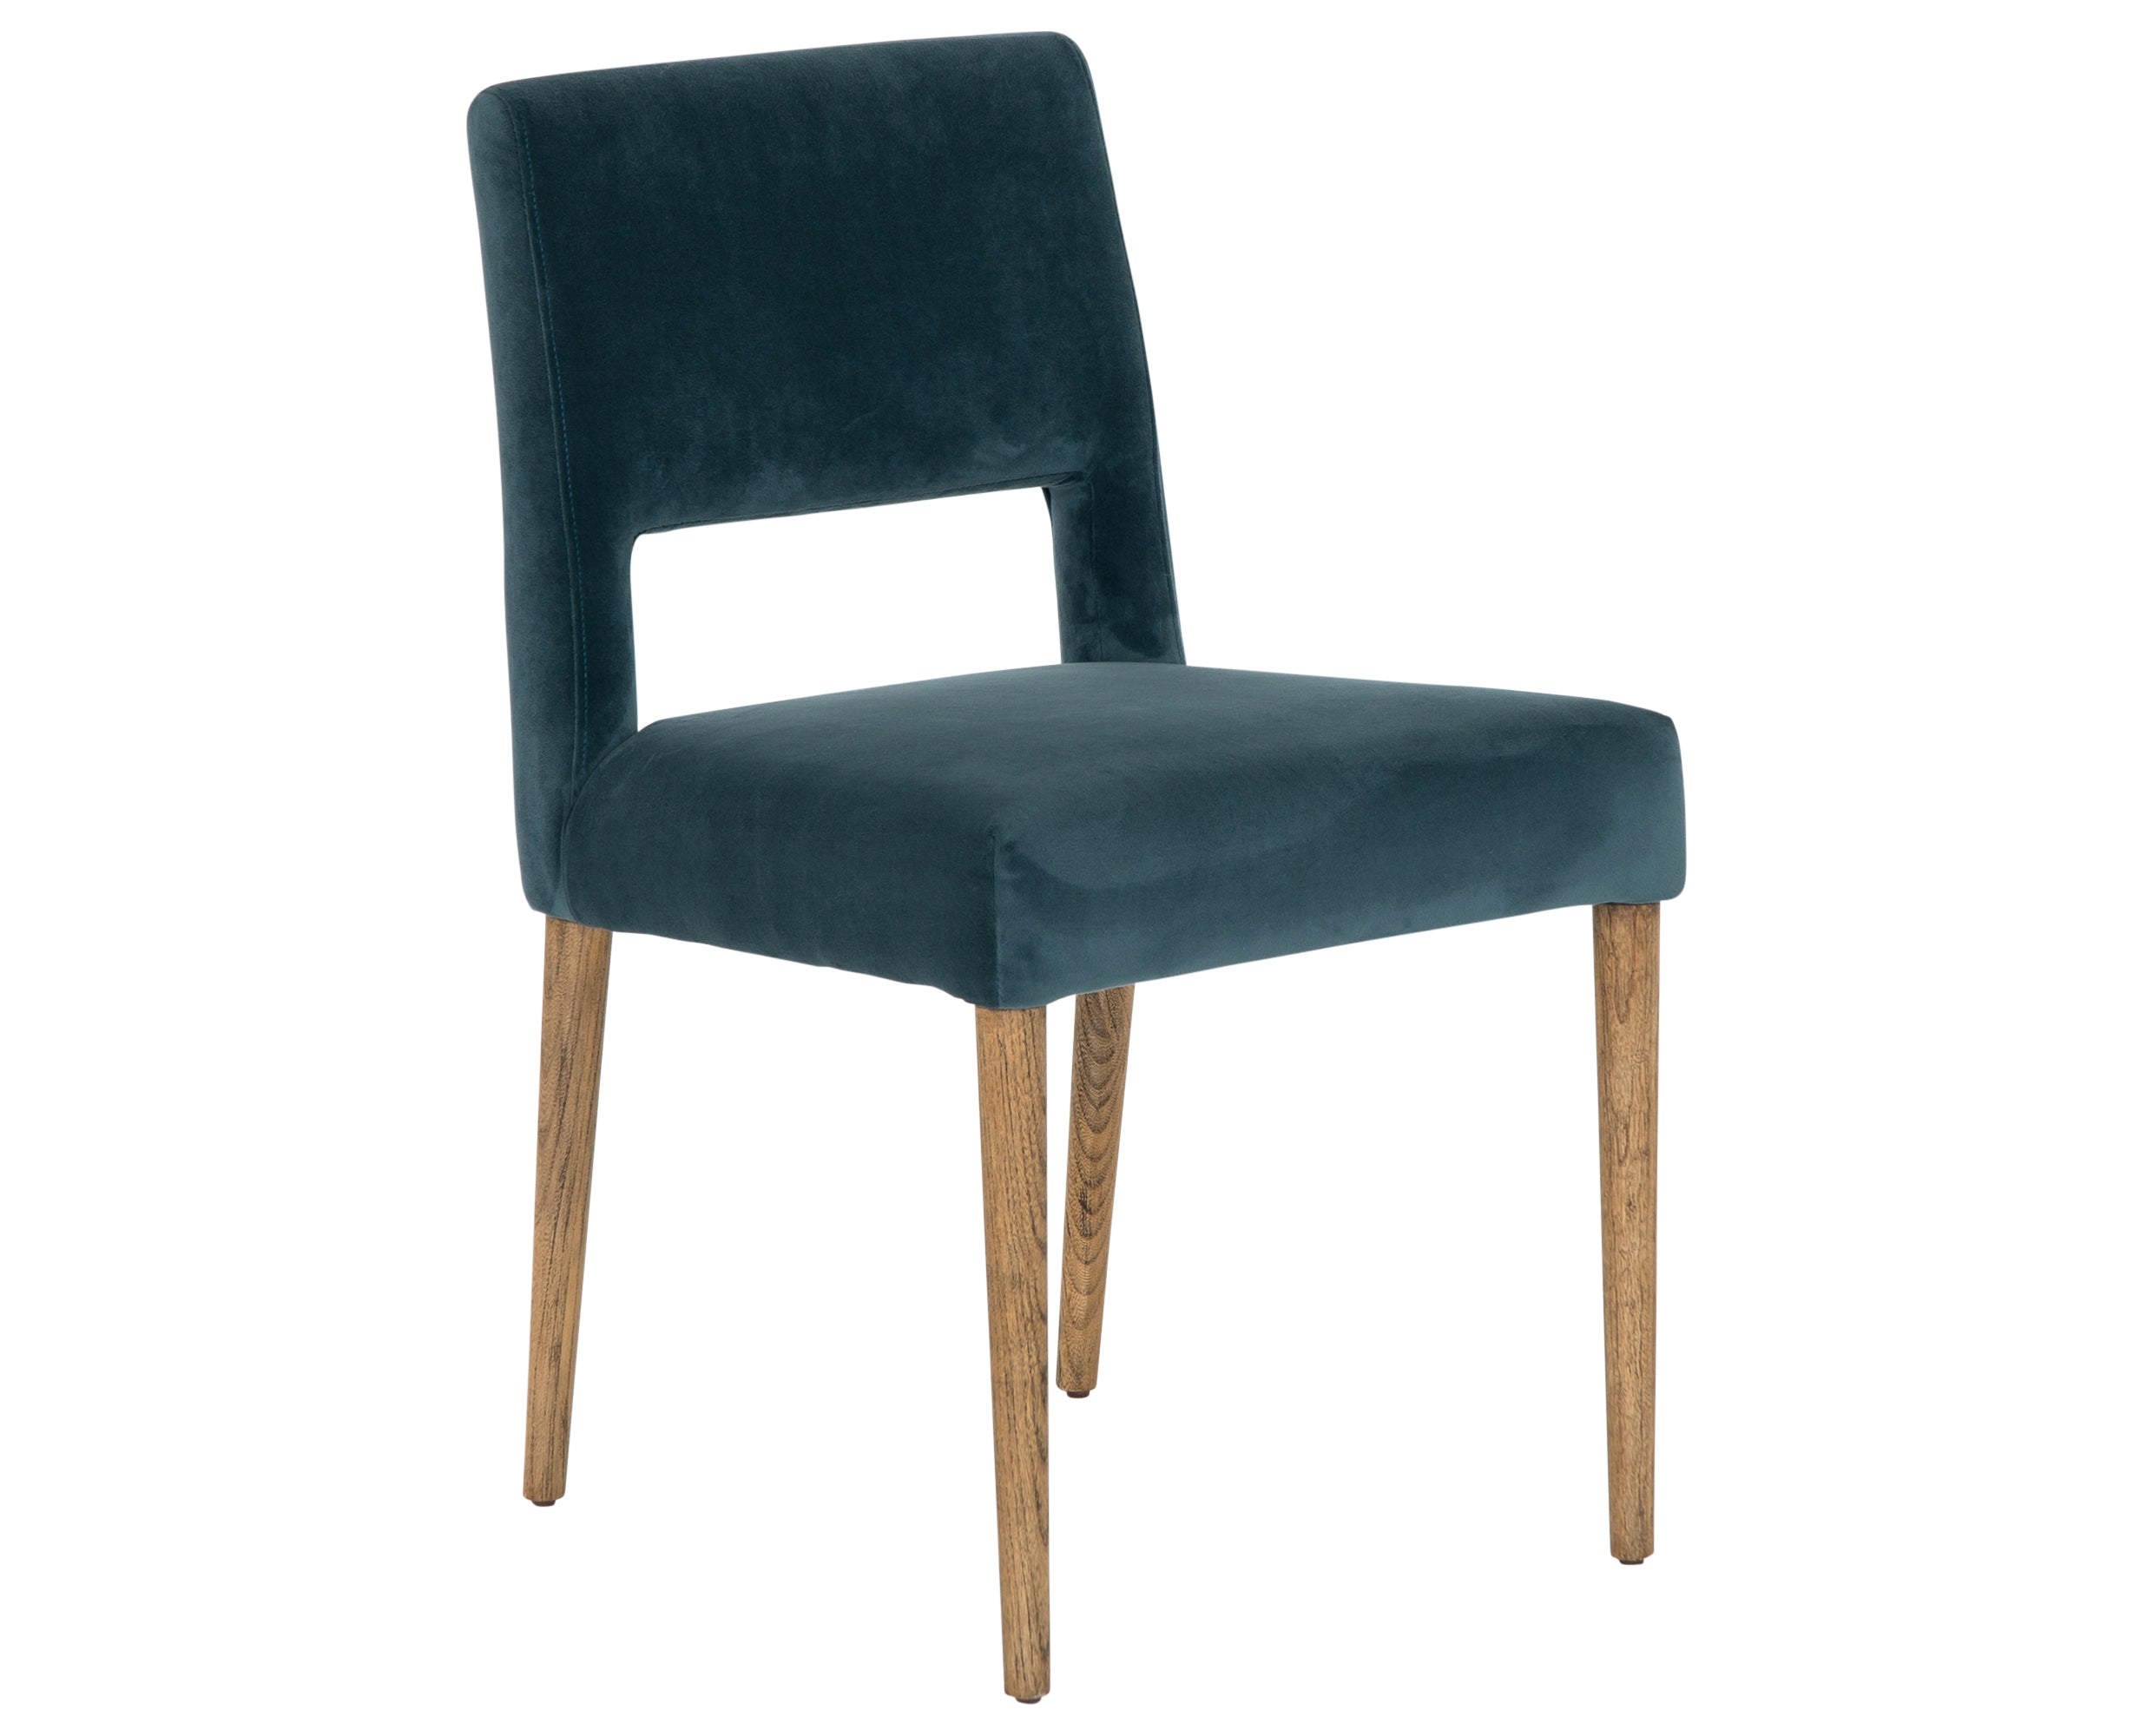 Bella Jasper Fabric with Toasted Nettlewood | Joseph Dining Chair | Valley Ridge Furniture